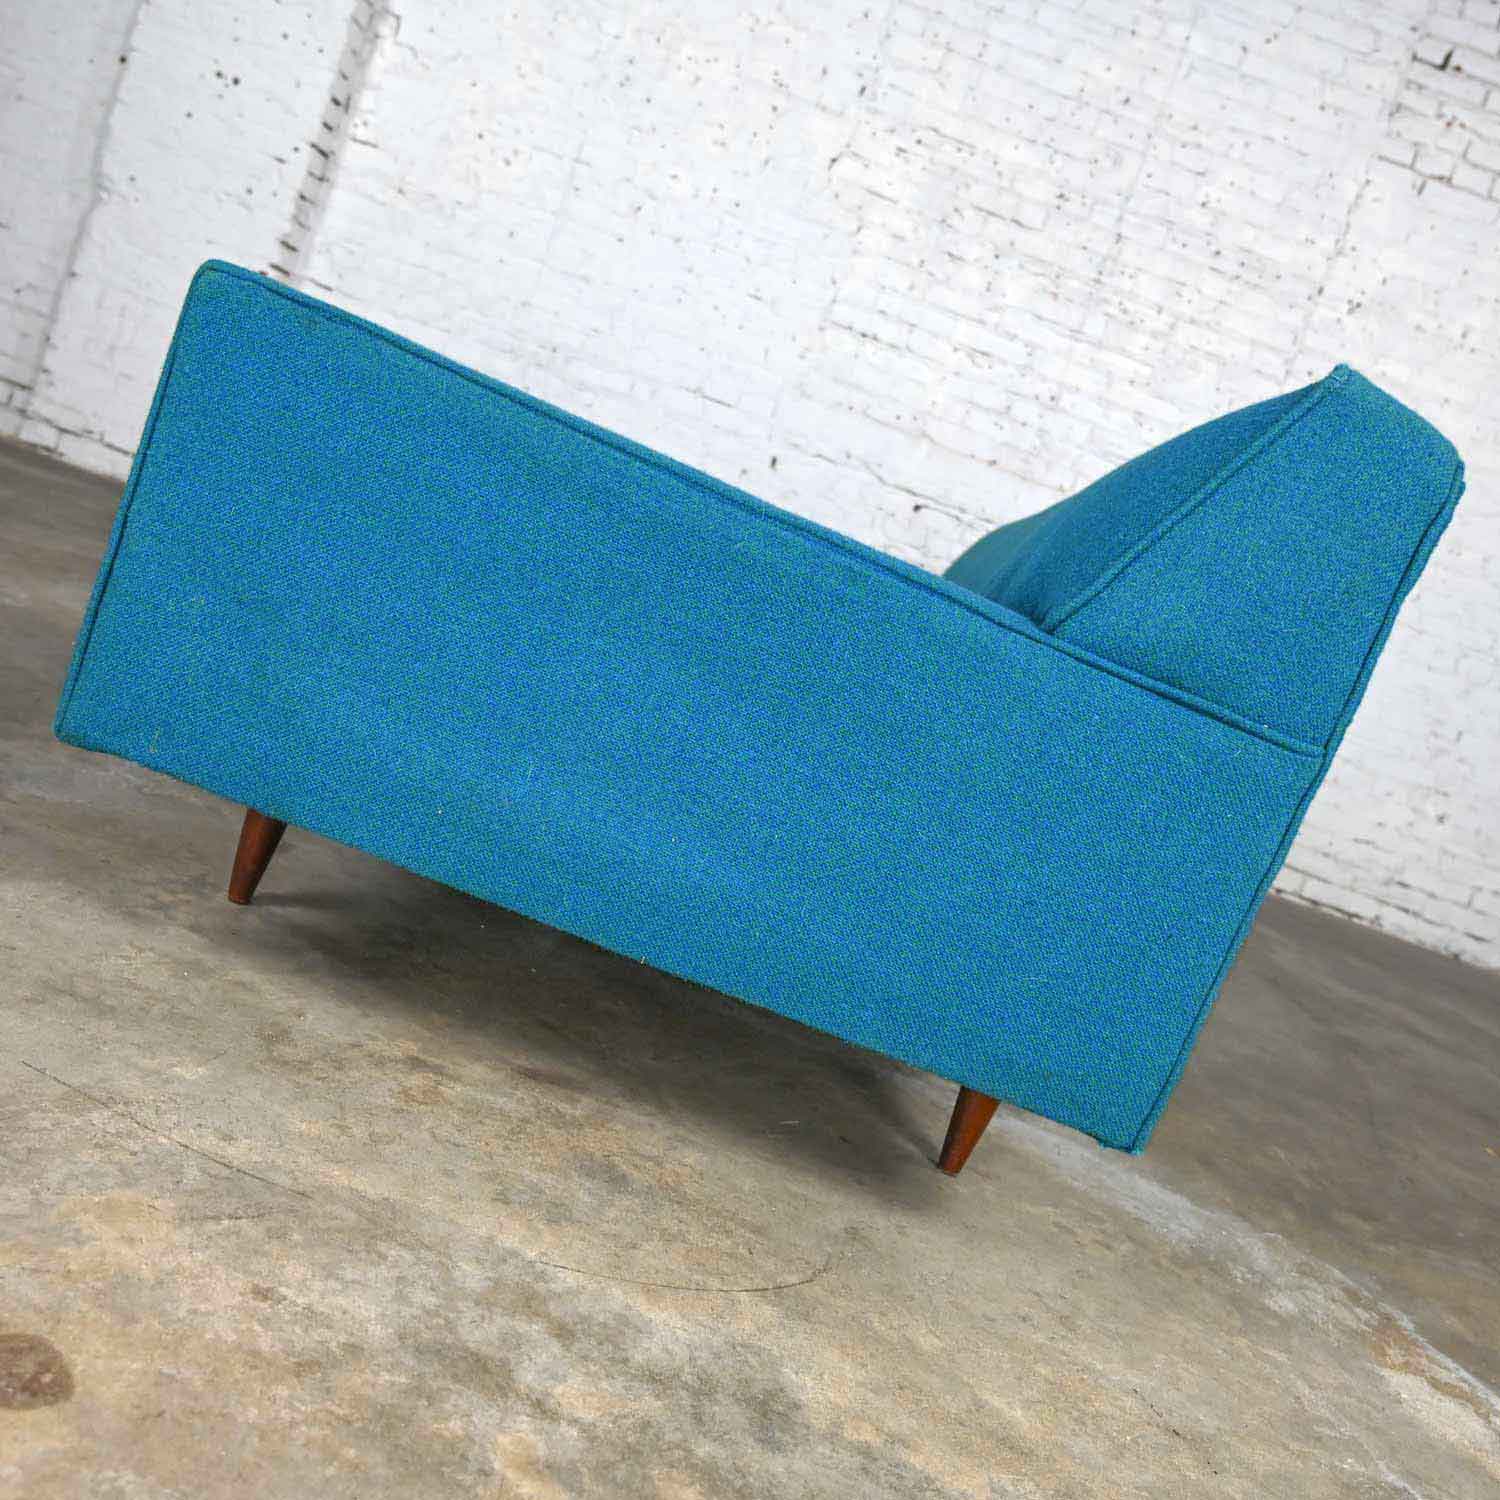 Vintage Mid-Century Modern Turquoise Lawson 4 Cushion Sofa Attributed to Milo Baughman for James Inc.